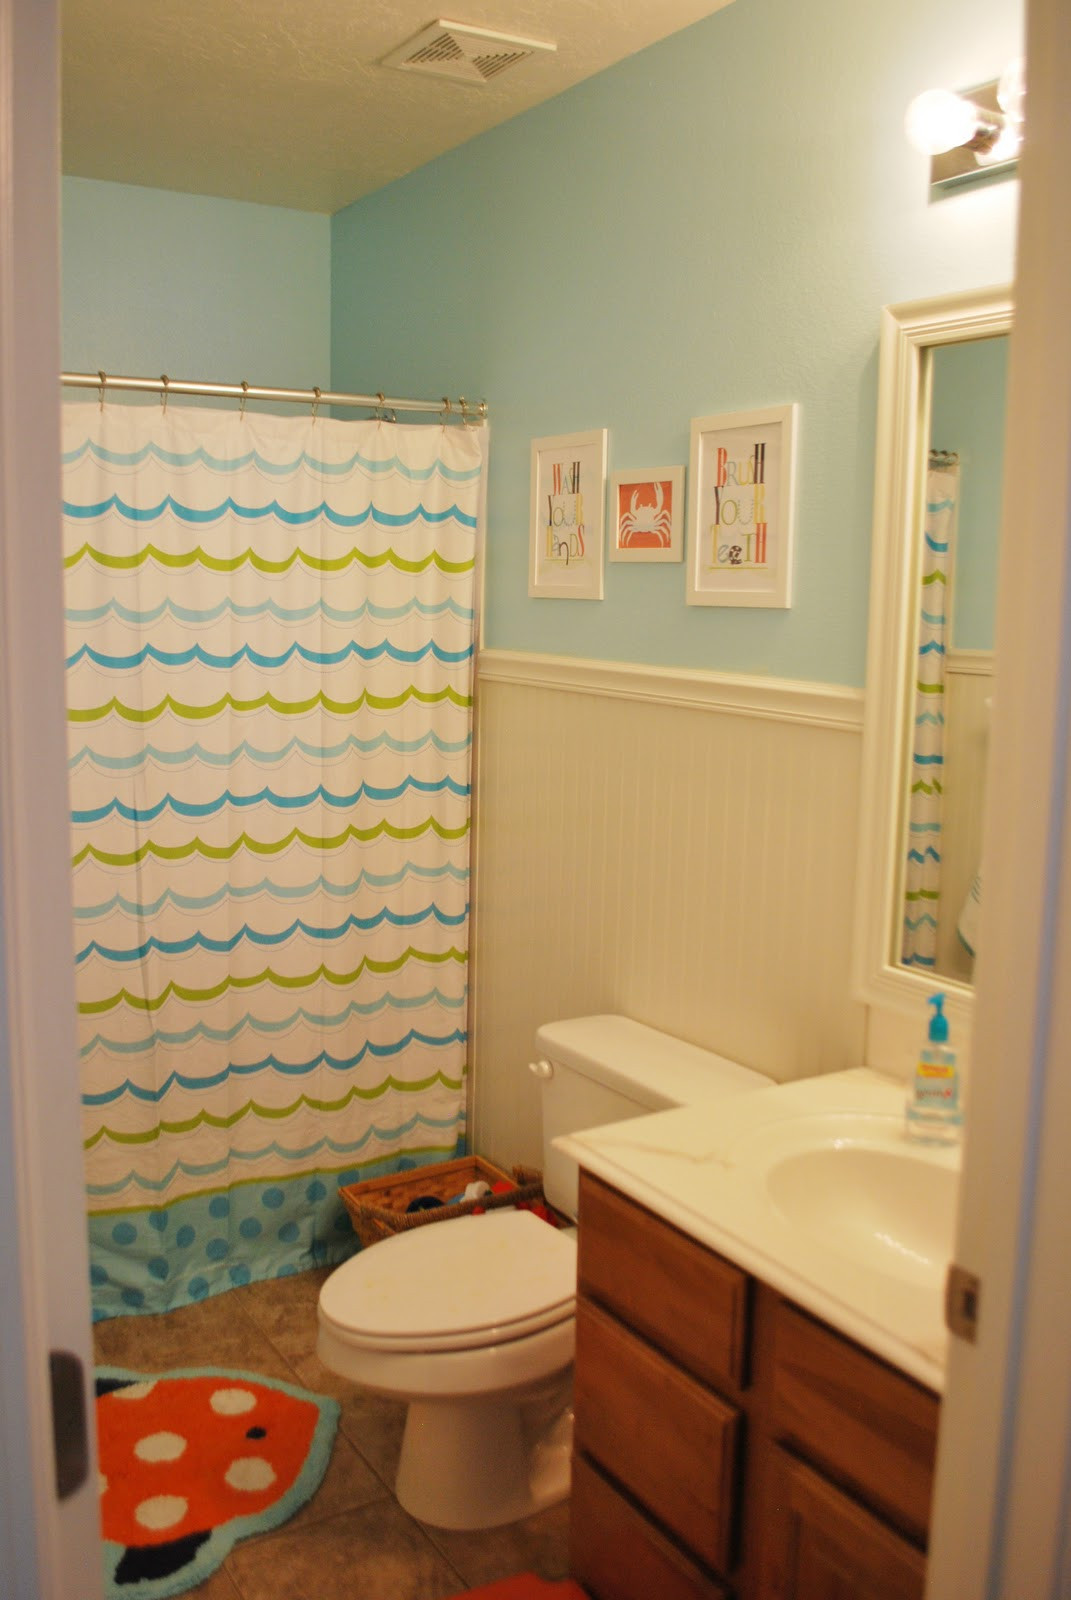 Bathroom Decor Kids
 Adorable Kids Bathroom Makeover by Loving Your Space